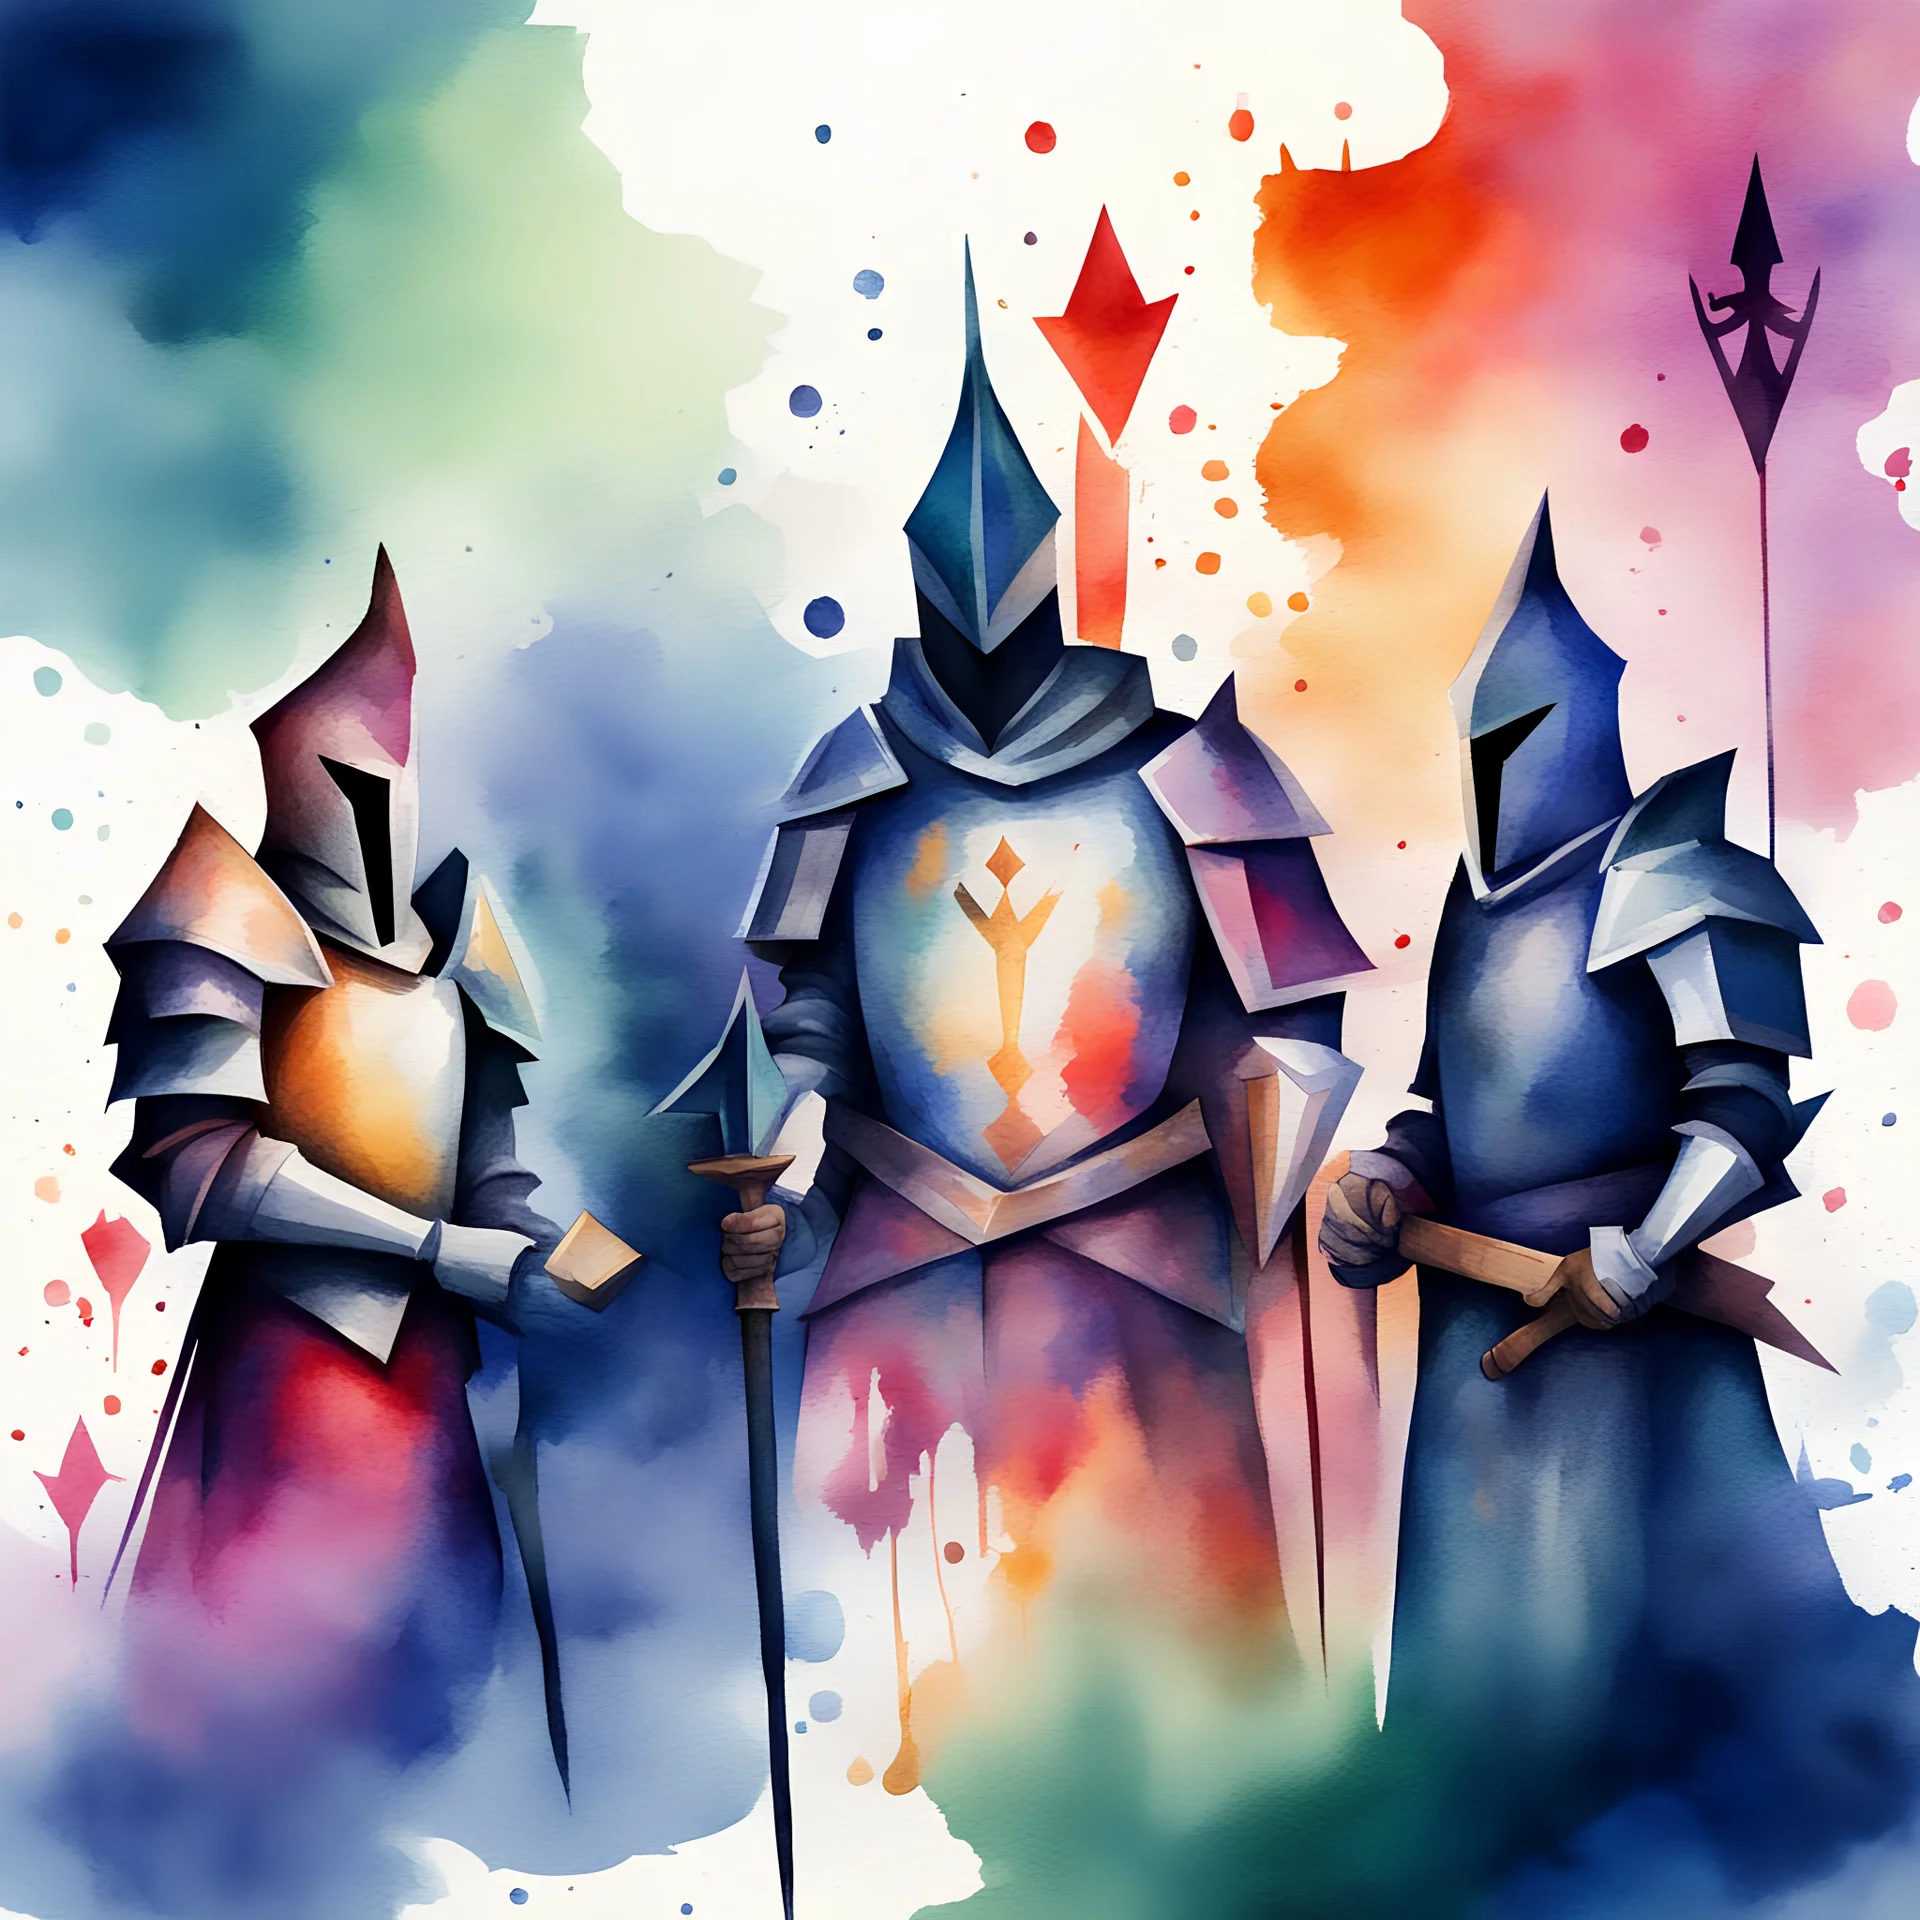 Council of Card Knights in watercolor painting abstract art style